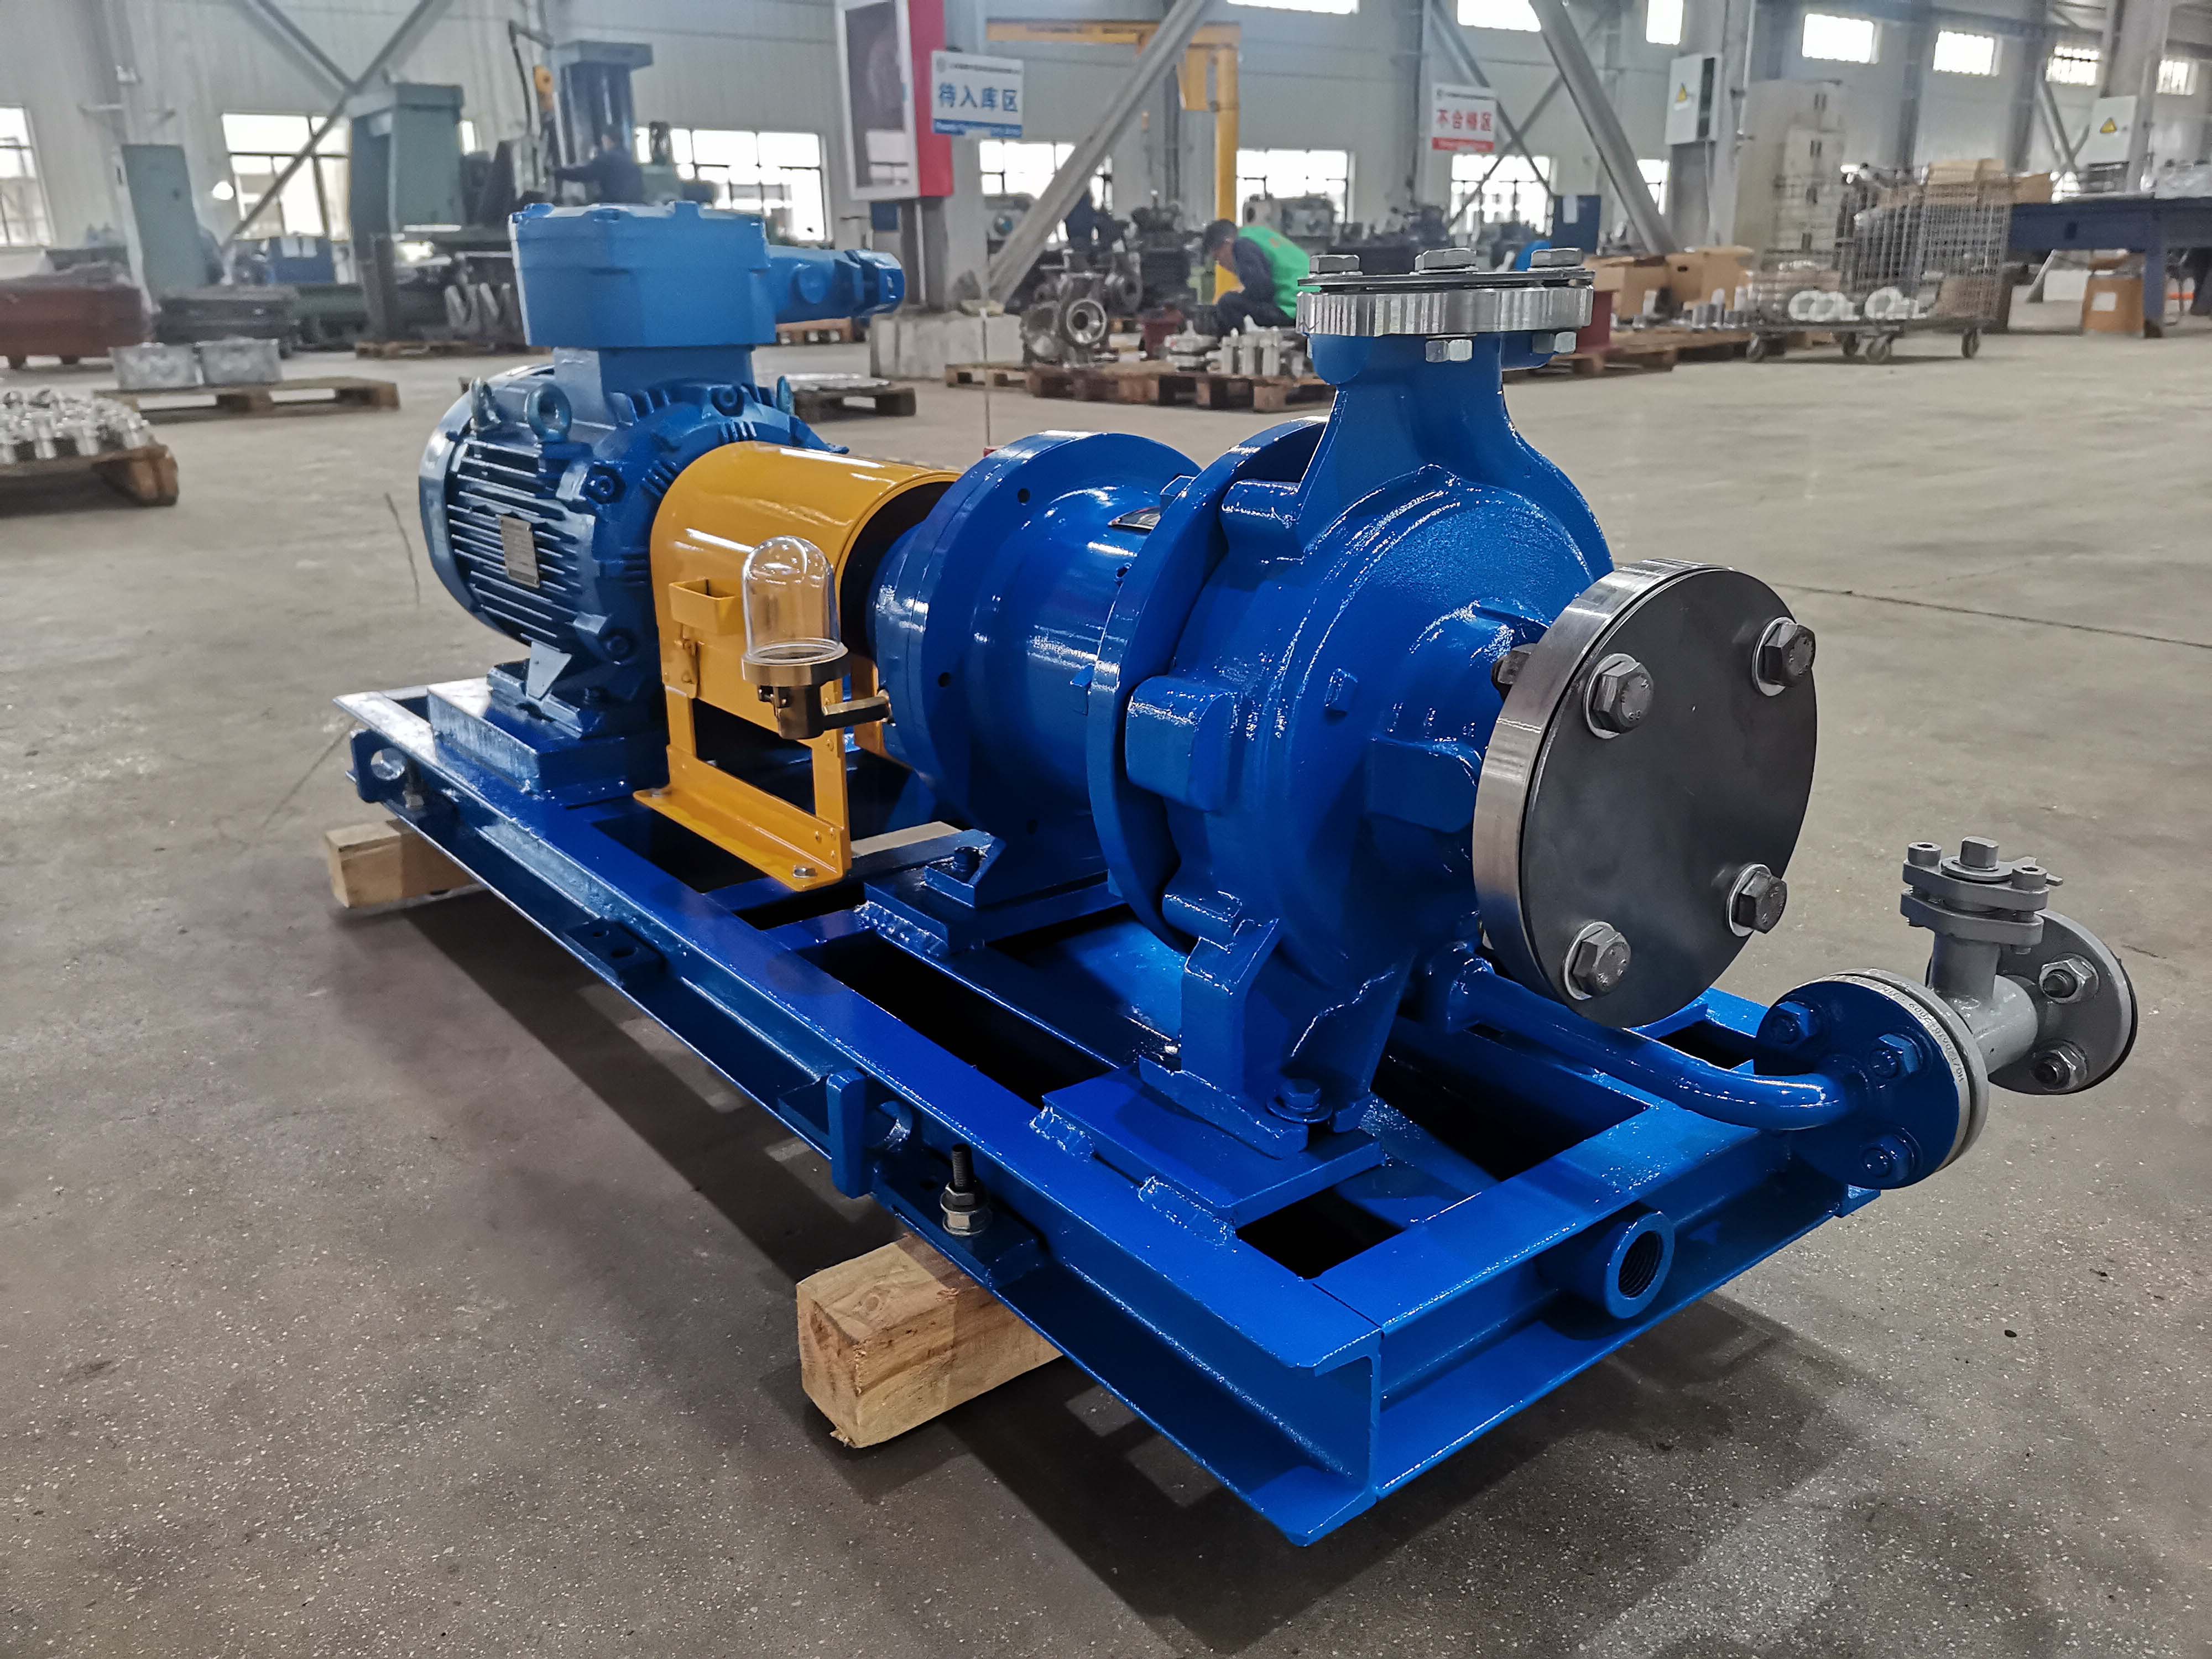 Magnetic Drive Pumps With Drainage System& Ball Valves